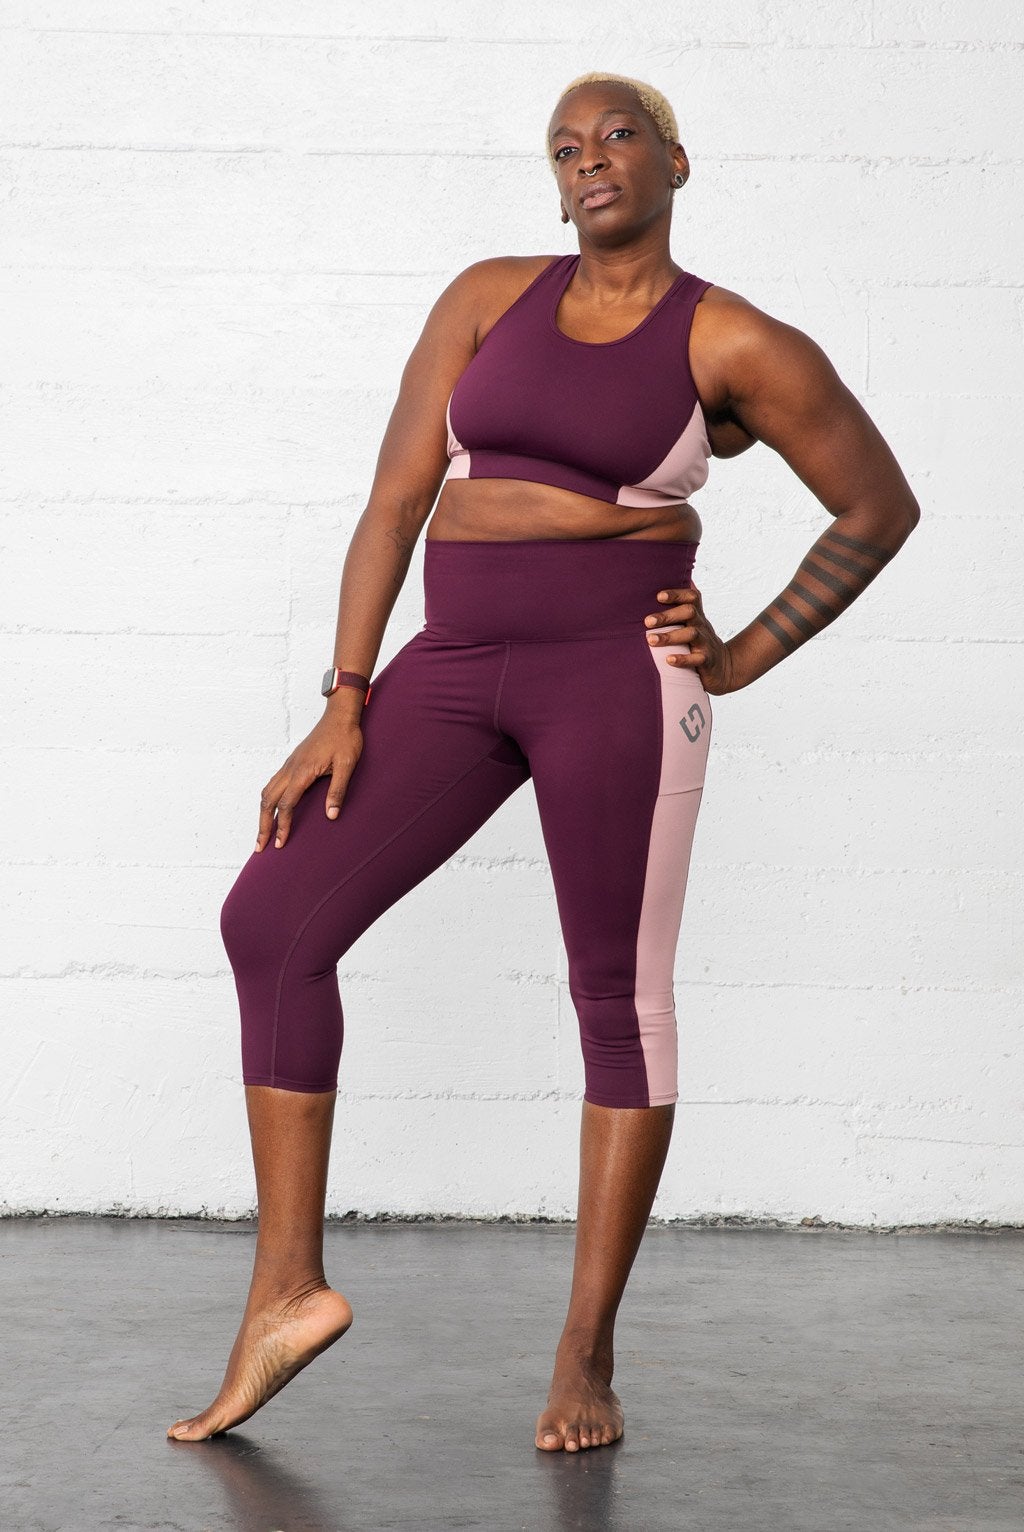 kaos nægte Rytmisk A Review Of 7 Plus-Size Activewear Brands